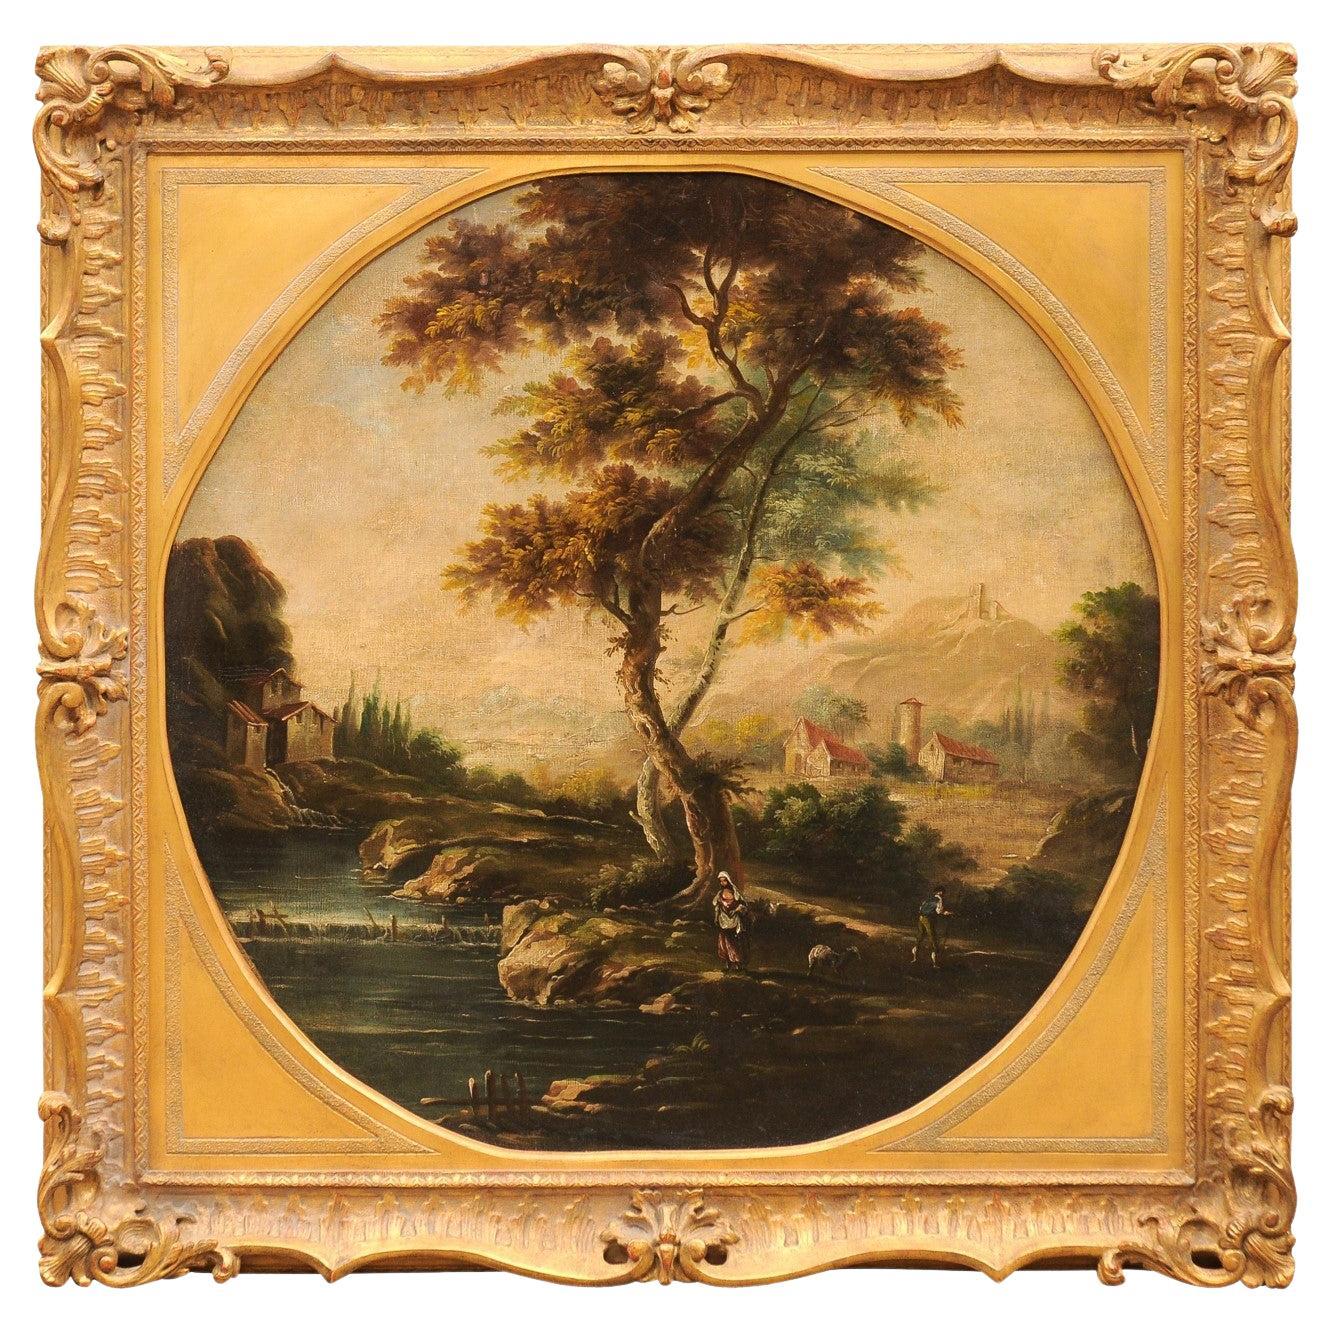 Large 19th Century English Oil on Canvas Landscape Painting in Gilt Frame